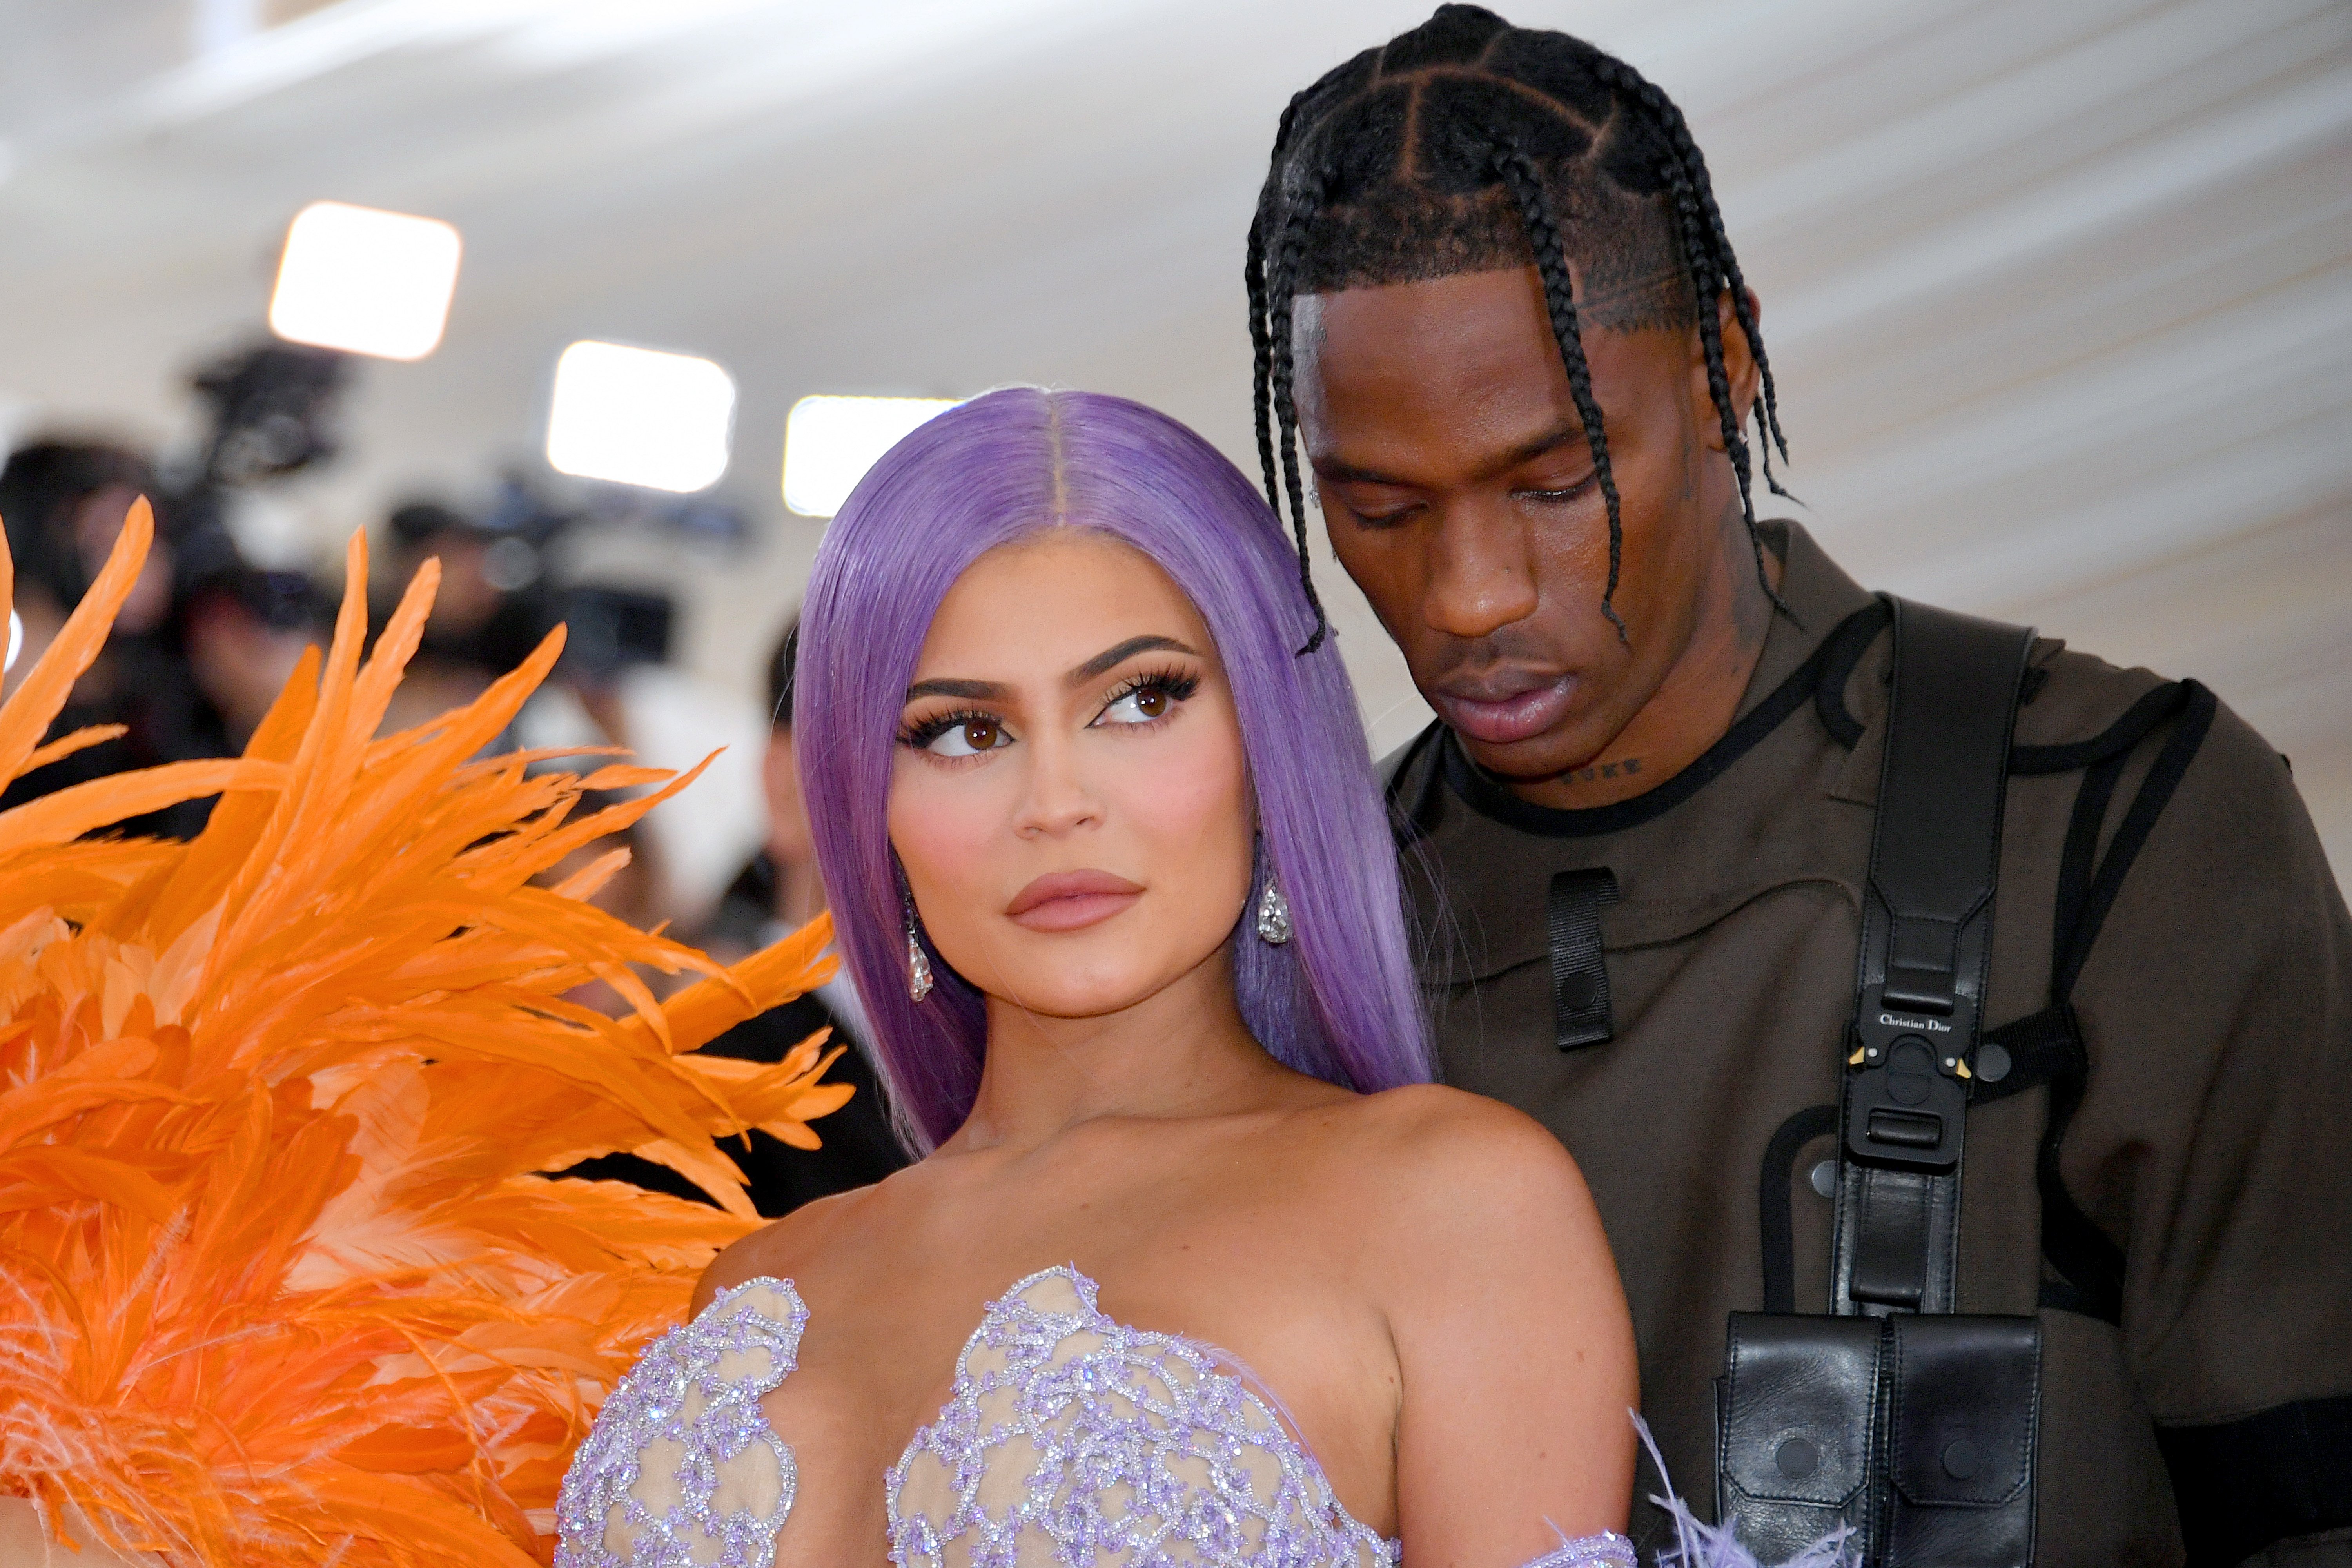 Kylie Jenner and Travis Scott at the 2019 Met Gala "Celebrating Camp: Notes on Fashion" on May 06, 2019 in New York City. | Source: Getty Images